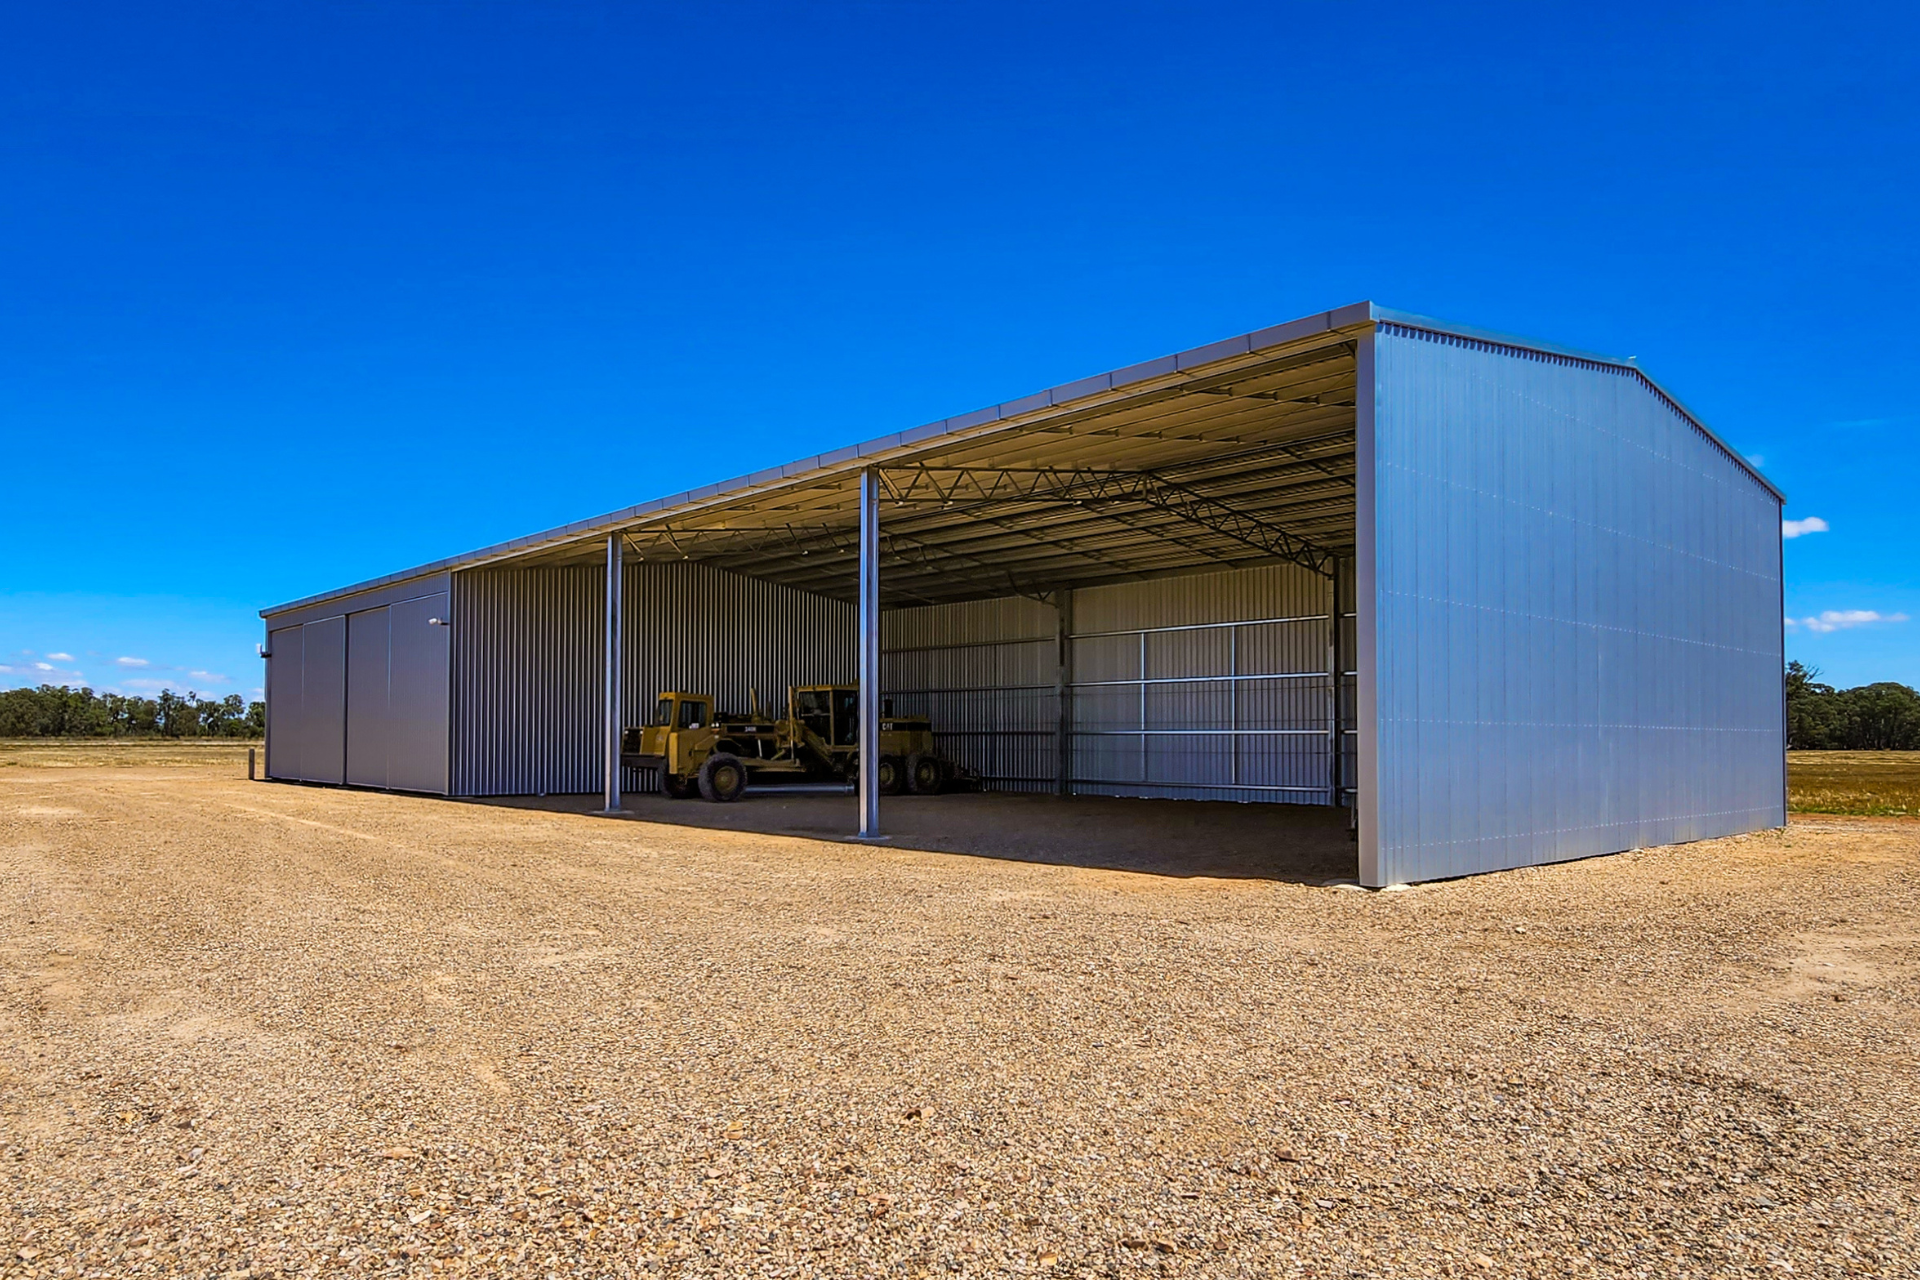 You are currently viewing 42.5m x 15m x 6m machinery shed